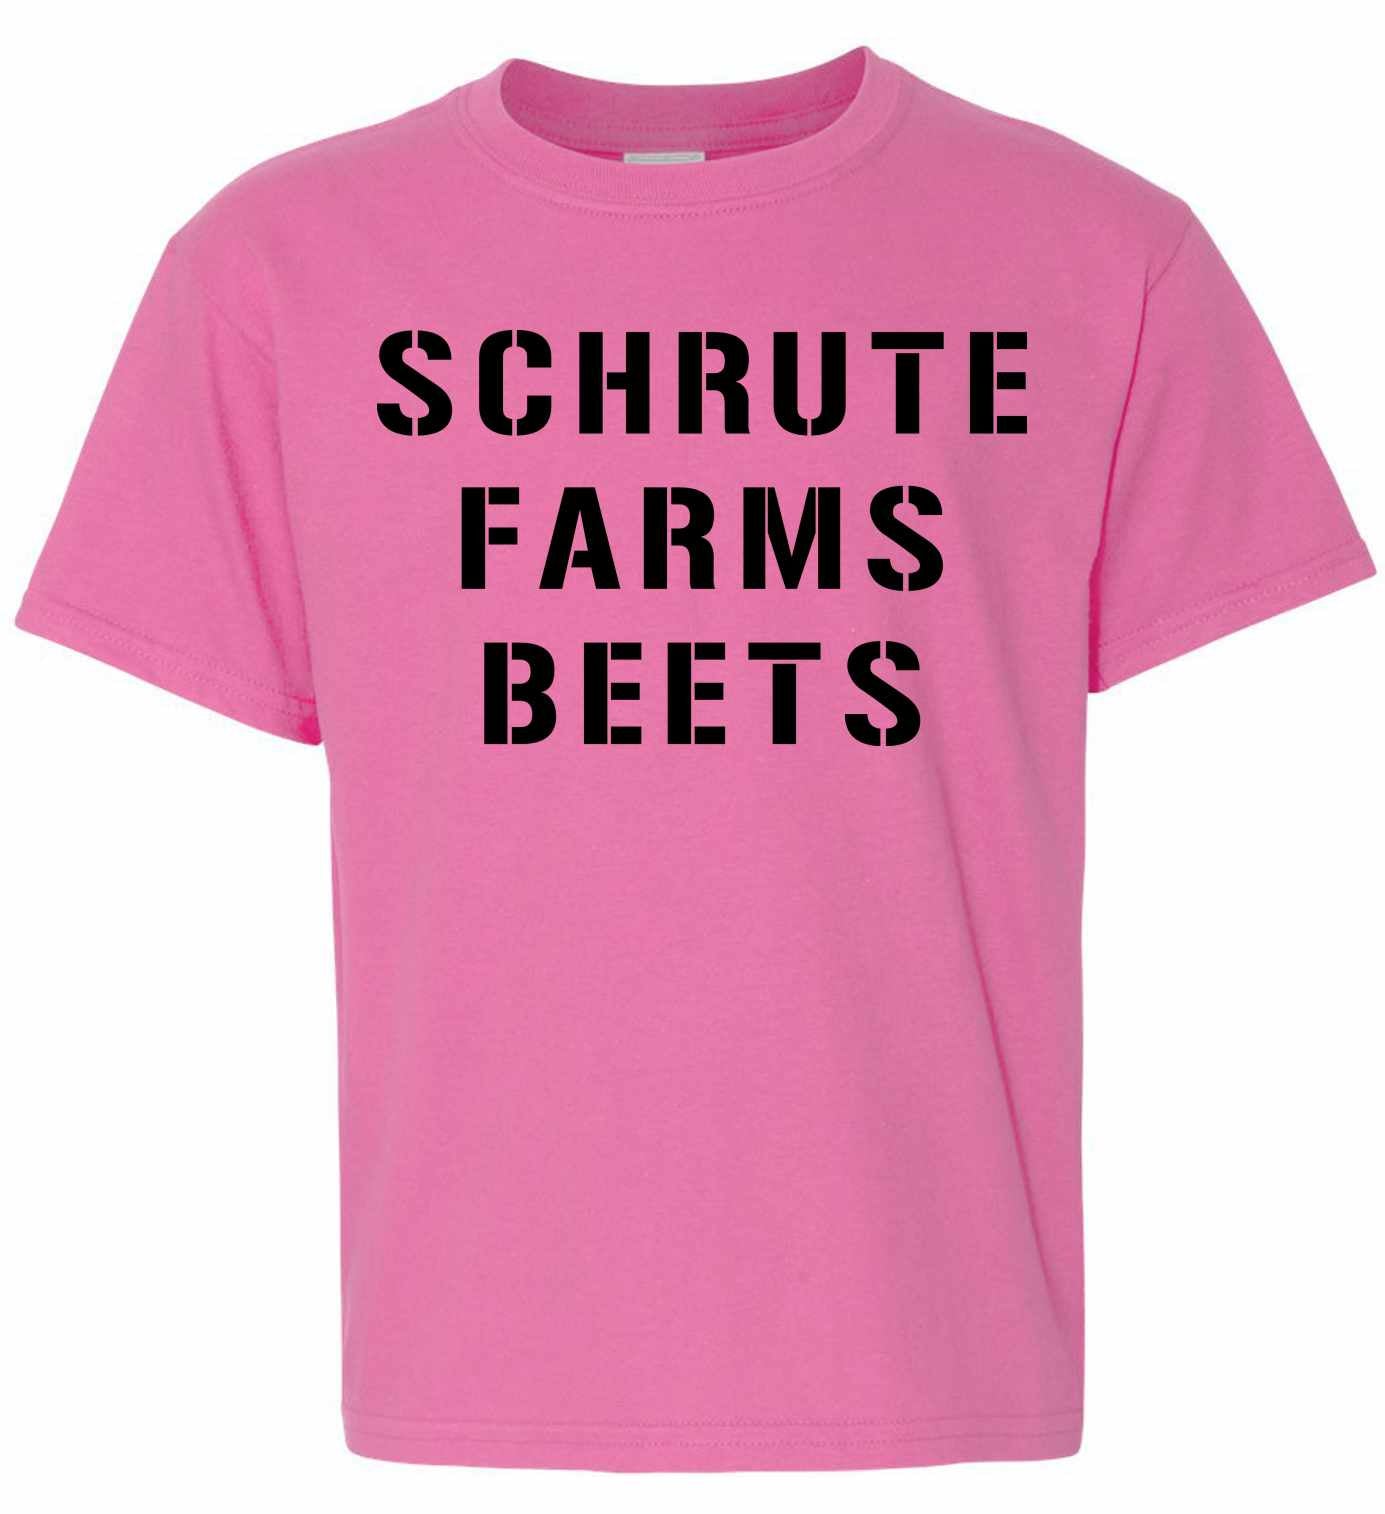 SCHRUTE FARMS BEETS on Youth T-Shirt (#396-201)